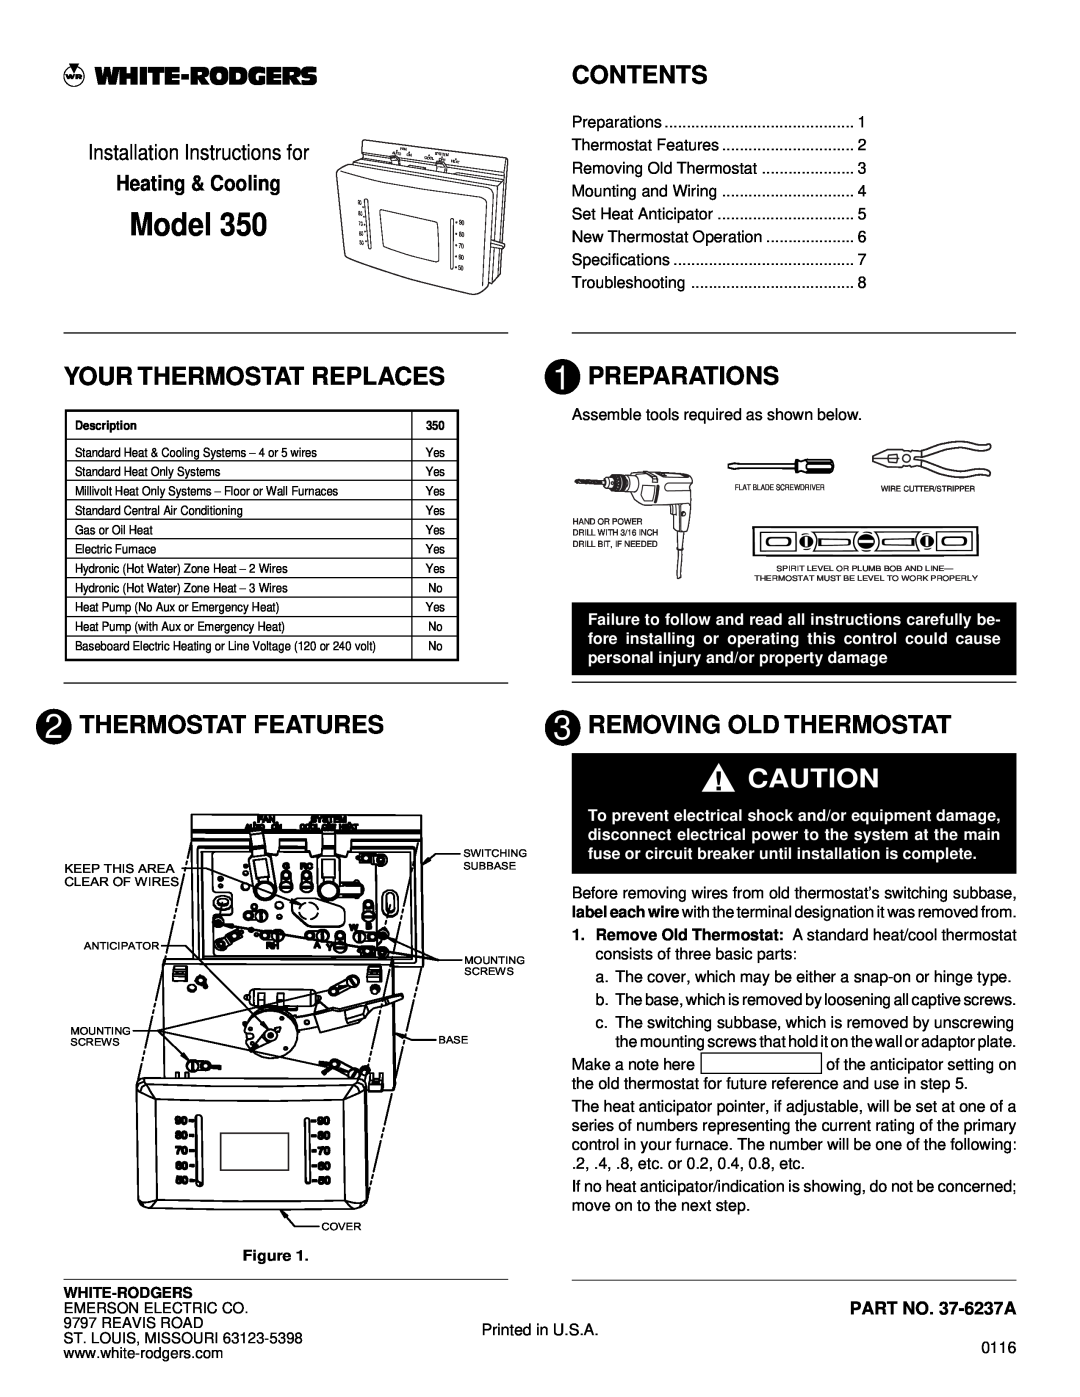 White Rodgers 350 installation instructions Your Thermostat Replaces, Contents, Preparations, Thermostat Features, Model 